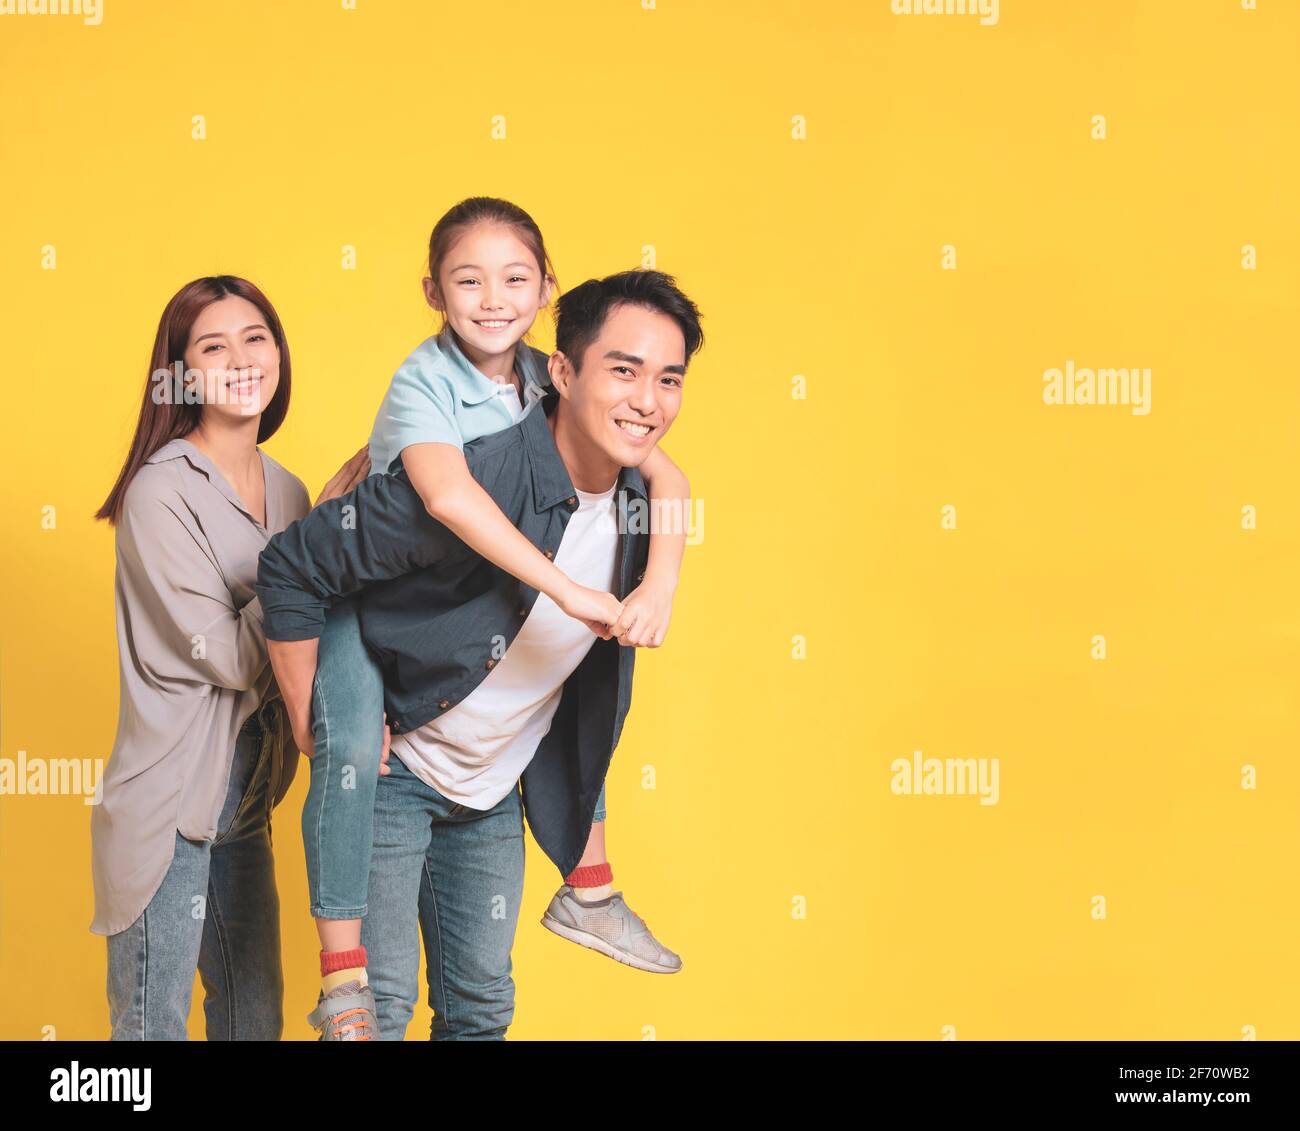 Happy Asian young family with one child standing embracing and smiling Stock Photo